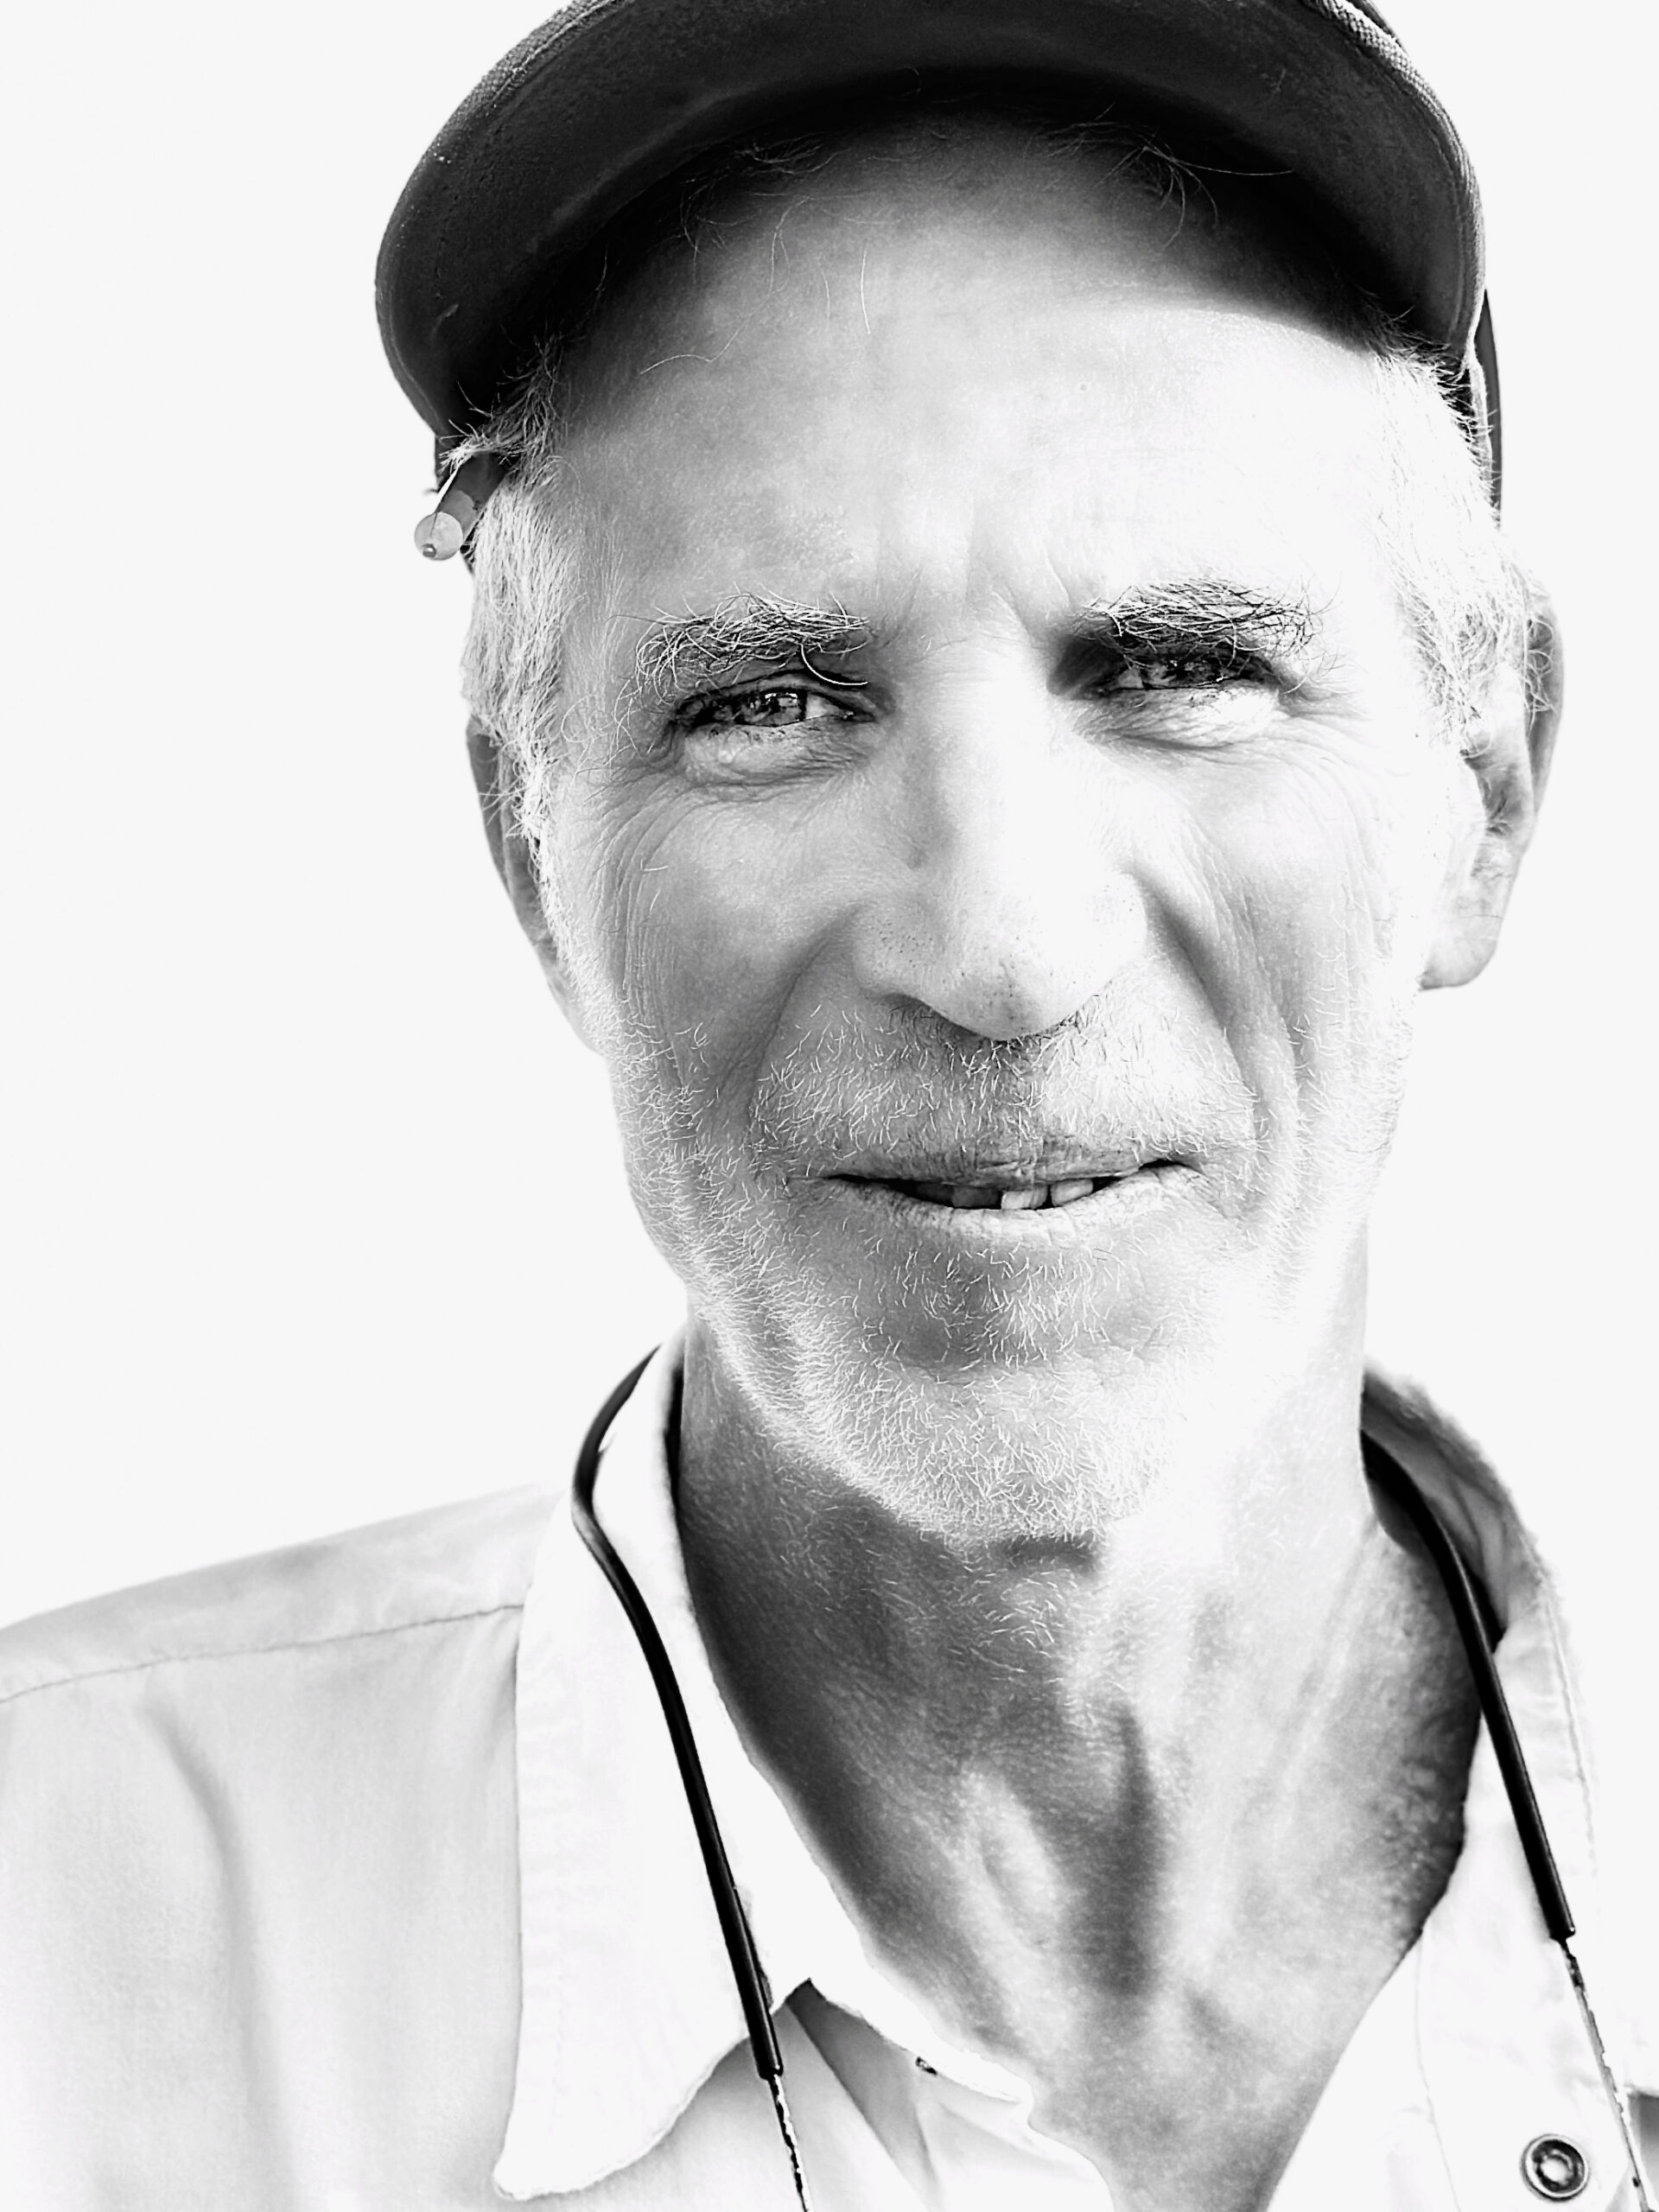 A black and white photo of an older man wearing a baseball cap.